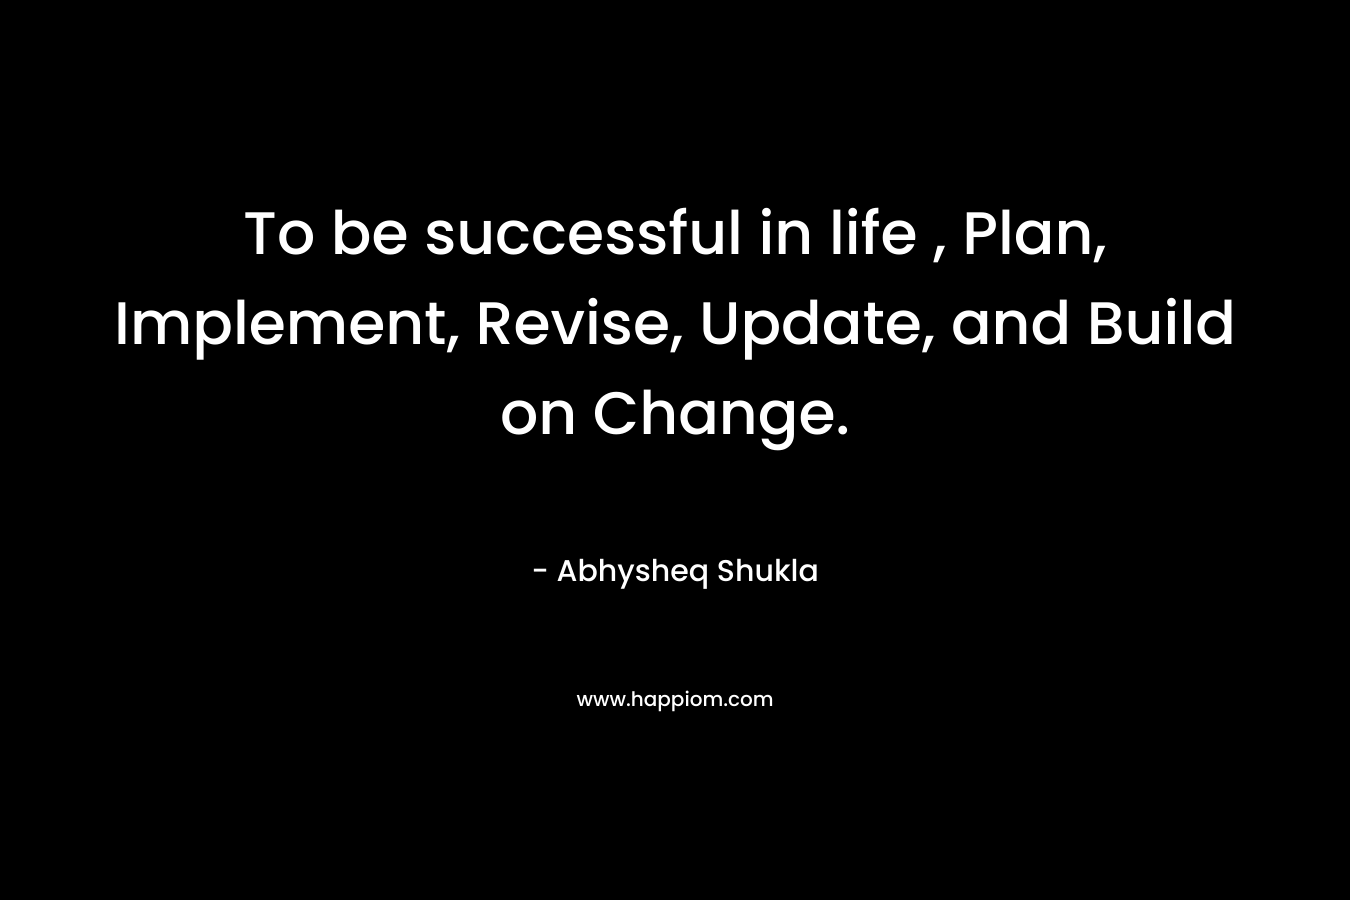 To be successful in life , Plan, Implement, Revise, Update, and Build on Change.